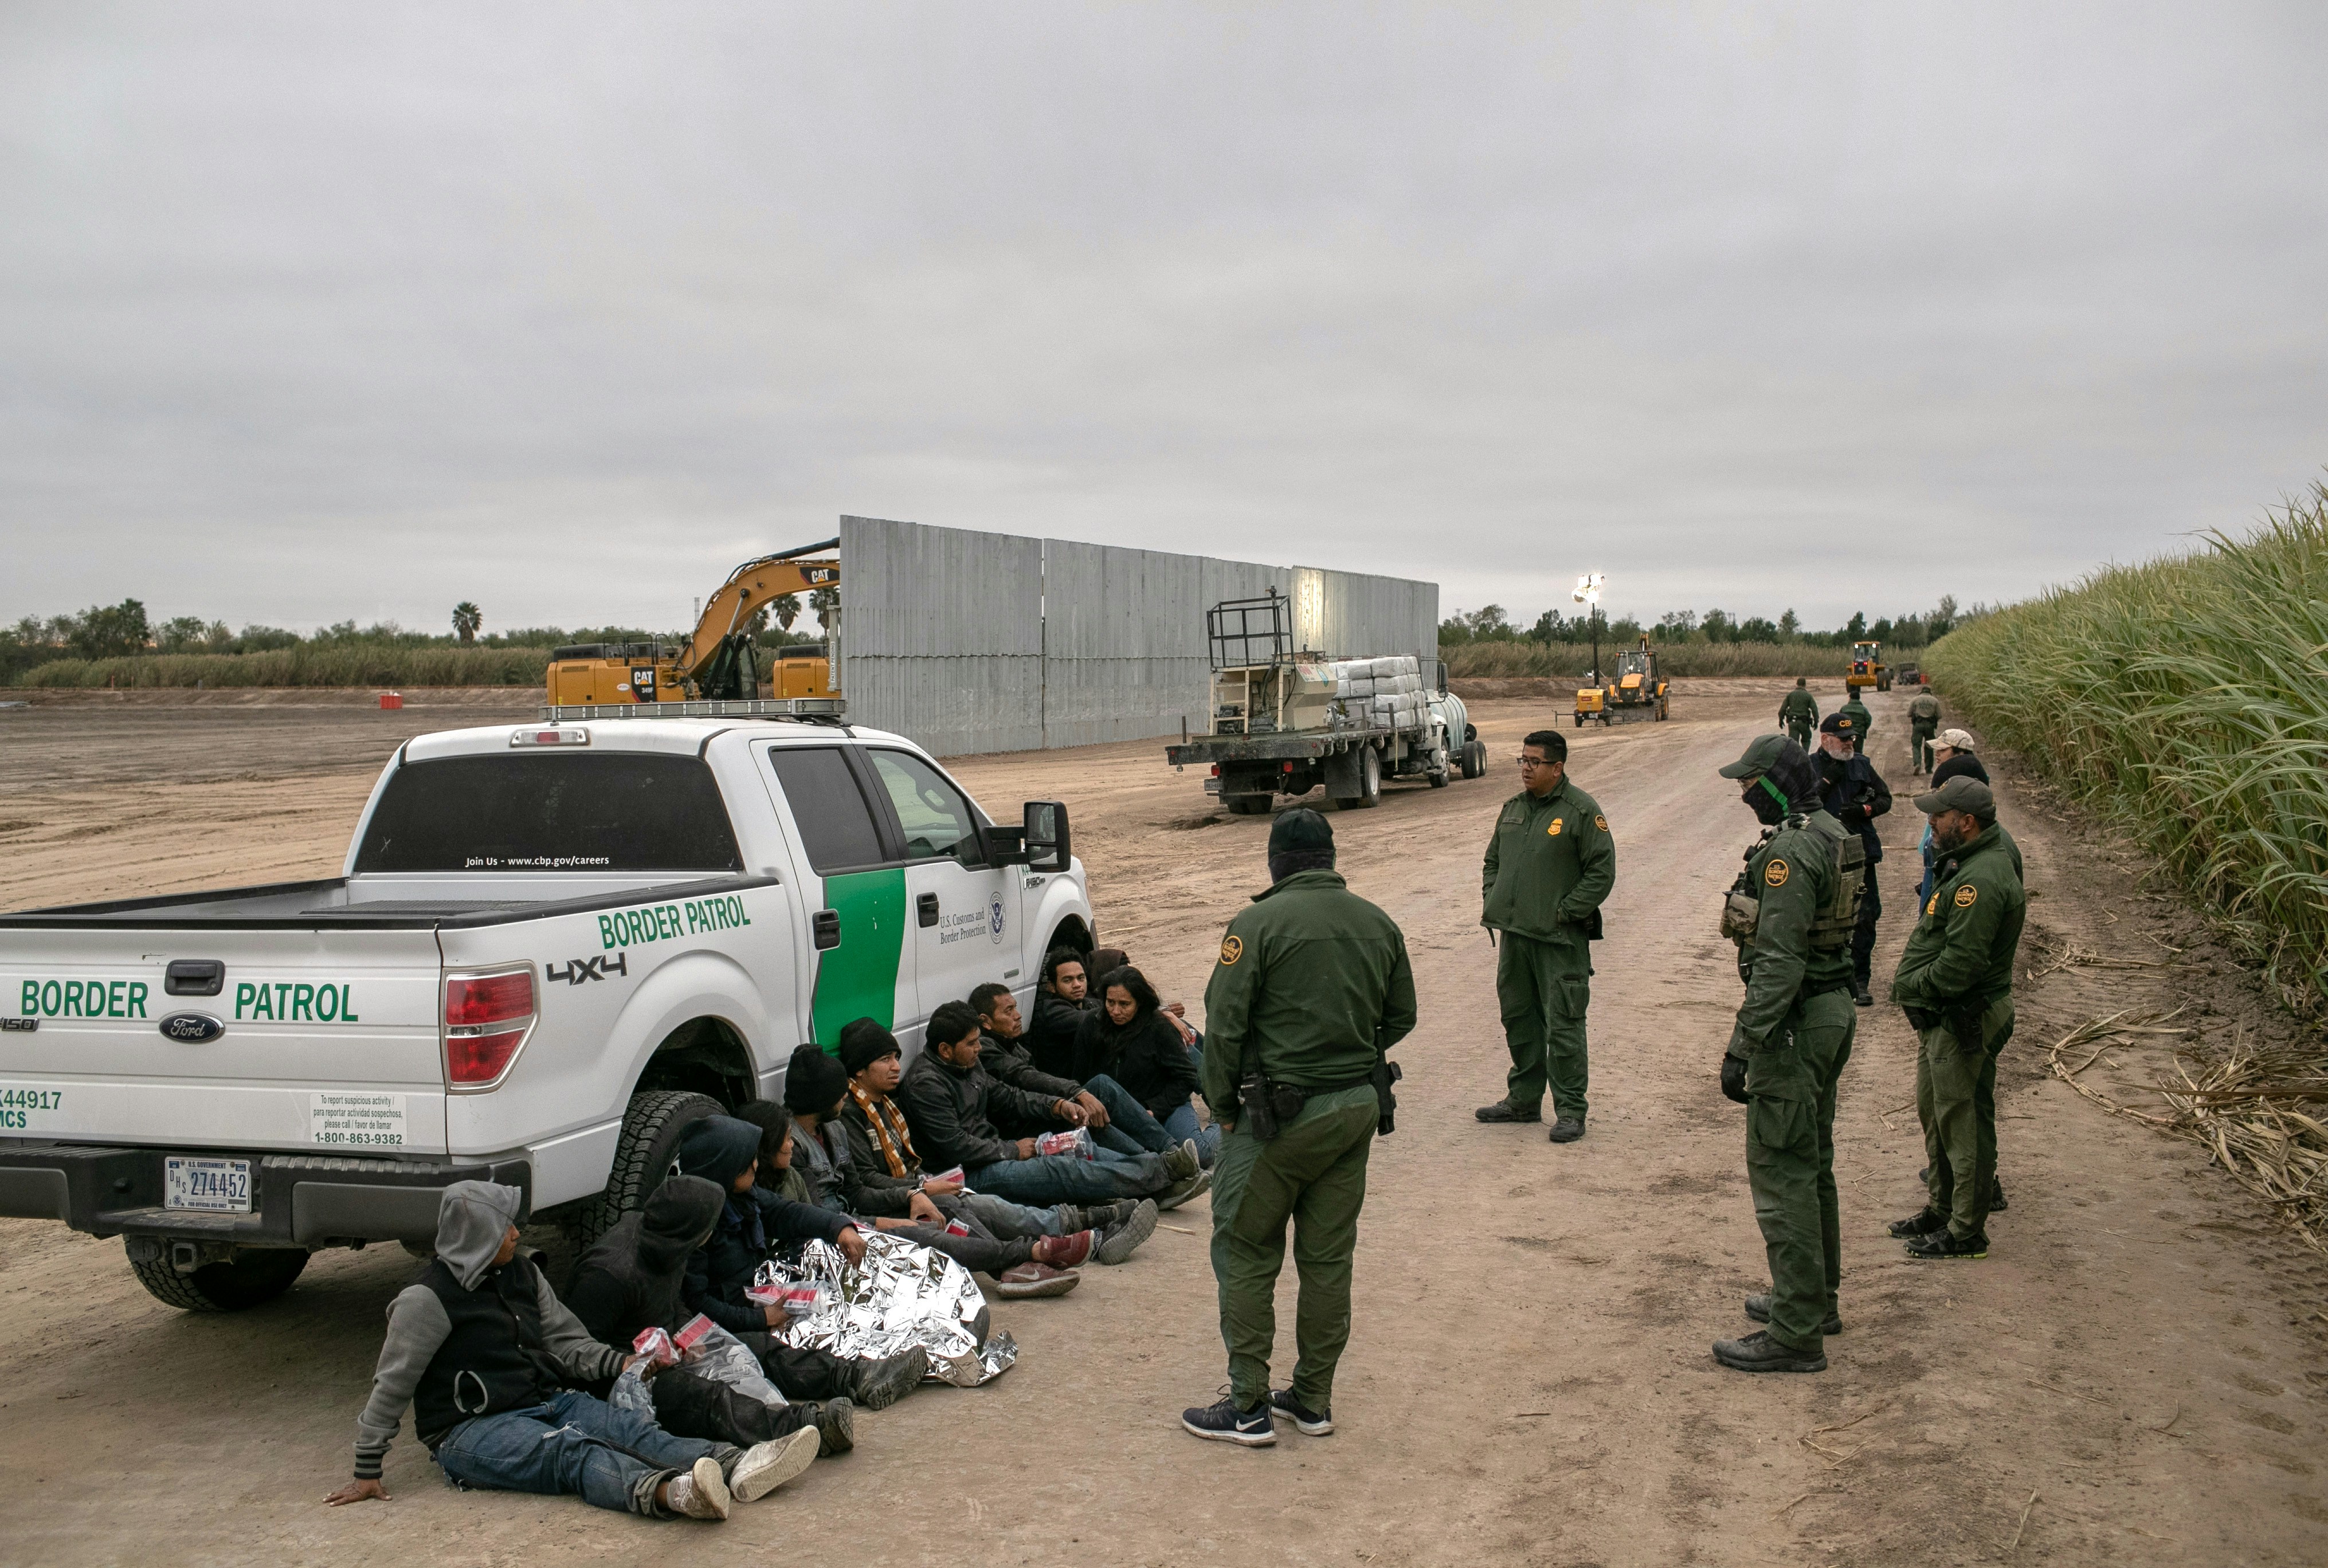 MISSION, TEXAS - DECEMBER 11: U.S. Border Patrol agents detain undocumented immigrants caught near a section of privately-built border wall under construction on December 11, 2019 near Mission, Texas. The hardline immigration group We Build The Wall is funding construction of the wall on private land along the Rio Grande, which forms the border with Mexico. The group, led by former Trump strategist Stephen Bannon claims to have raised tens of millions of dollars in a GoFundMe drive to build sections of wall along stretches of the U.S. southwest border with Mexico. (Photo by John Moore/Getty Images)